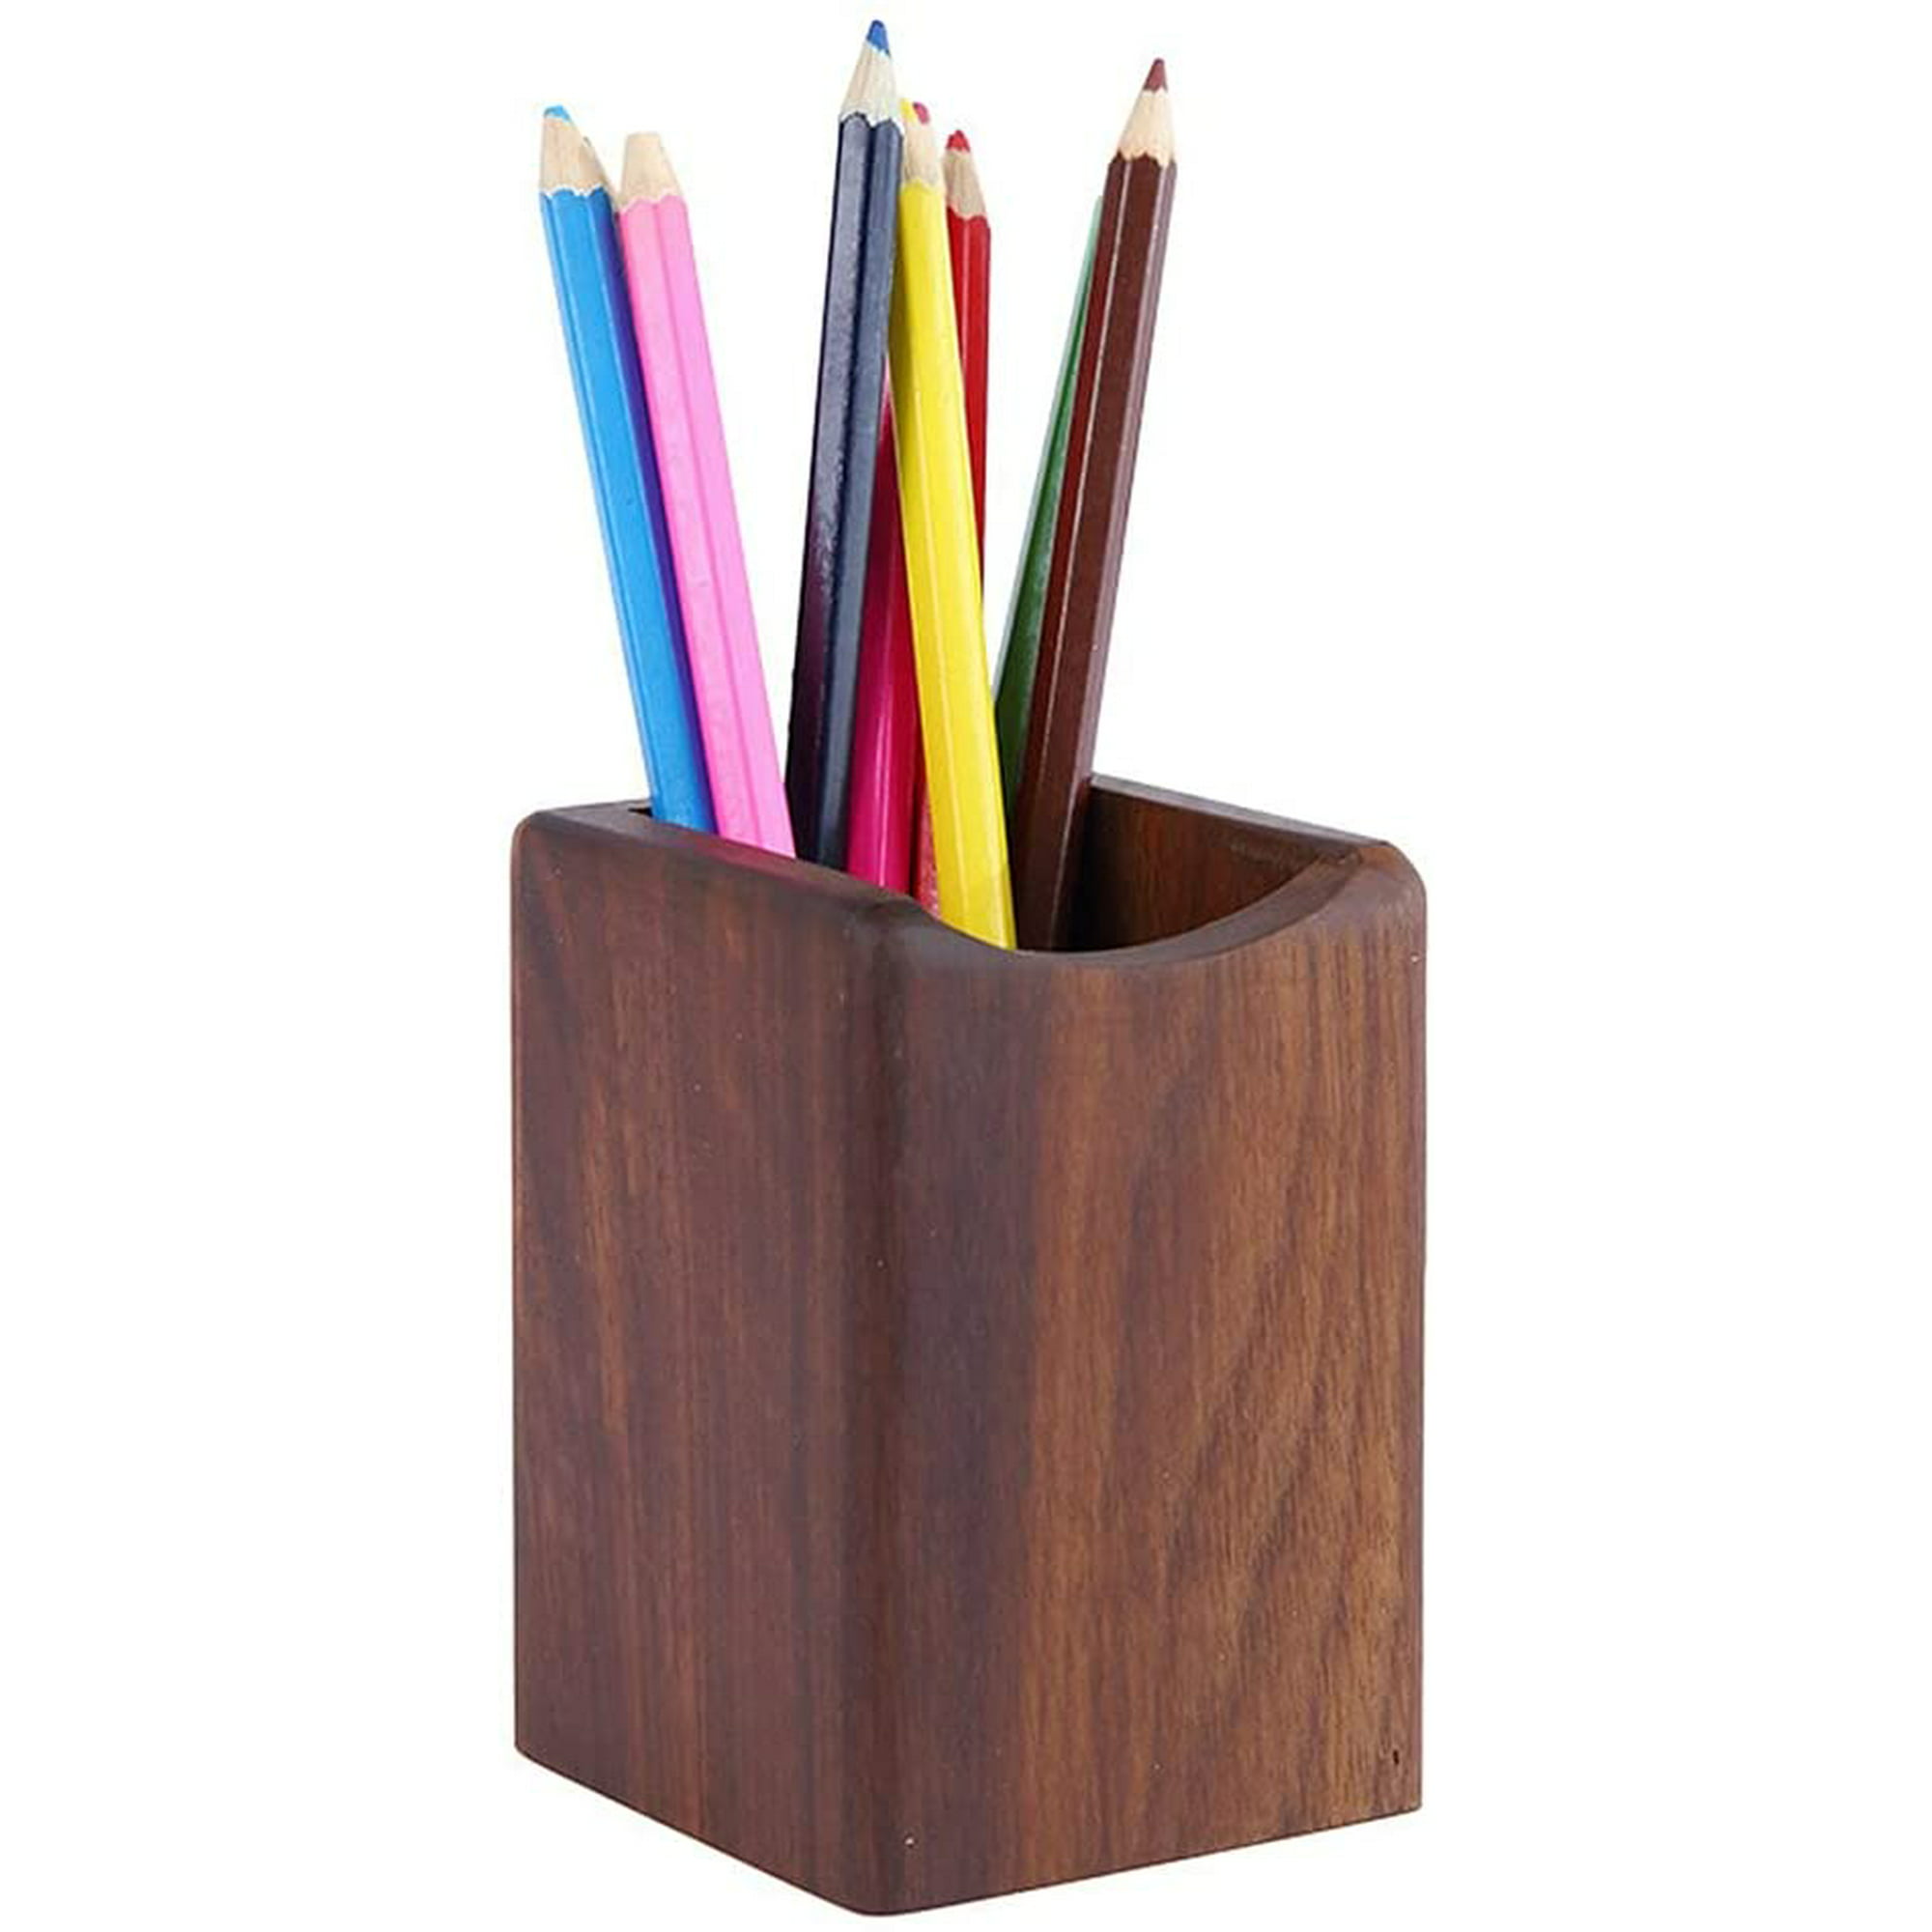 Bamboo Art Supply Organizer, Back to School Supplies, Hold 350+ Pencils,  Rotating School Supplies Holder for Pen, Colored Pencil, Art Brushes,  Desktop